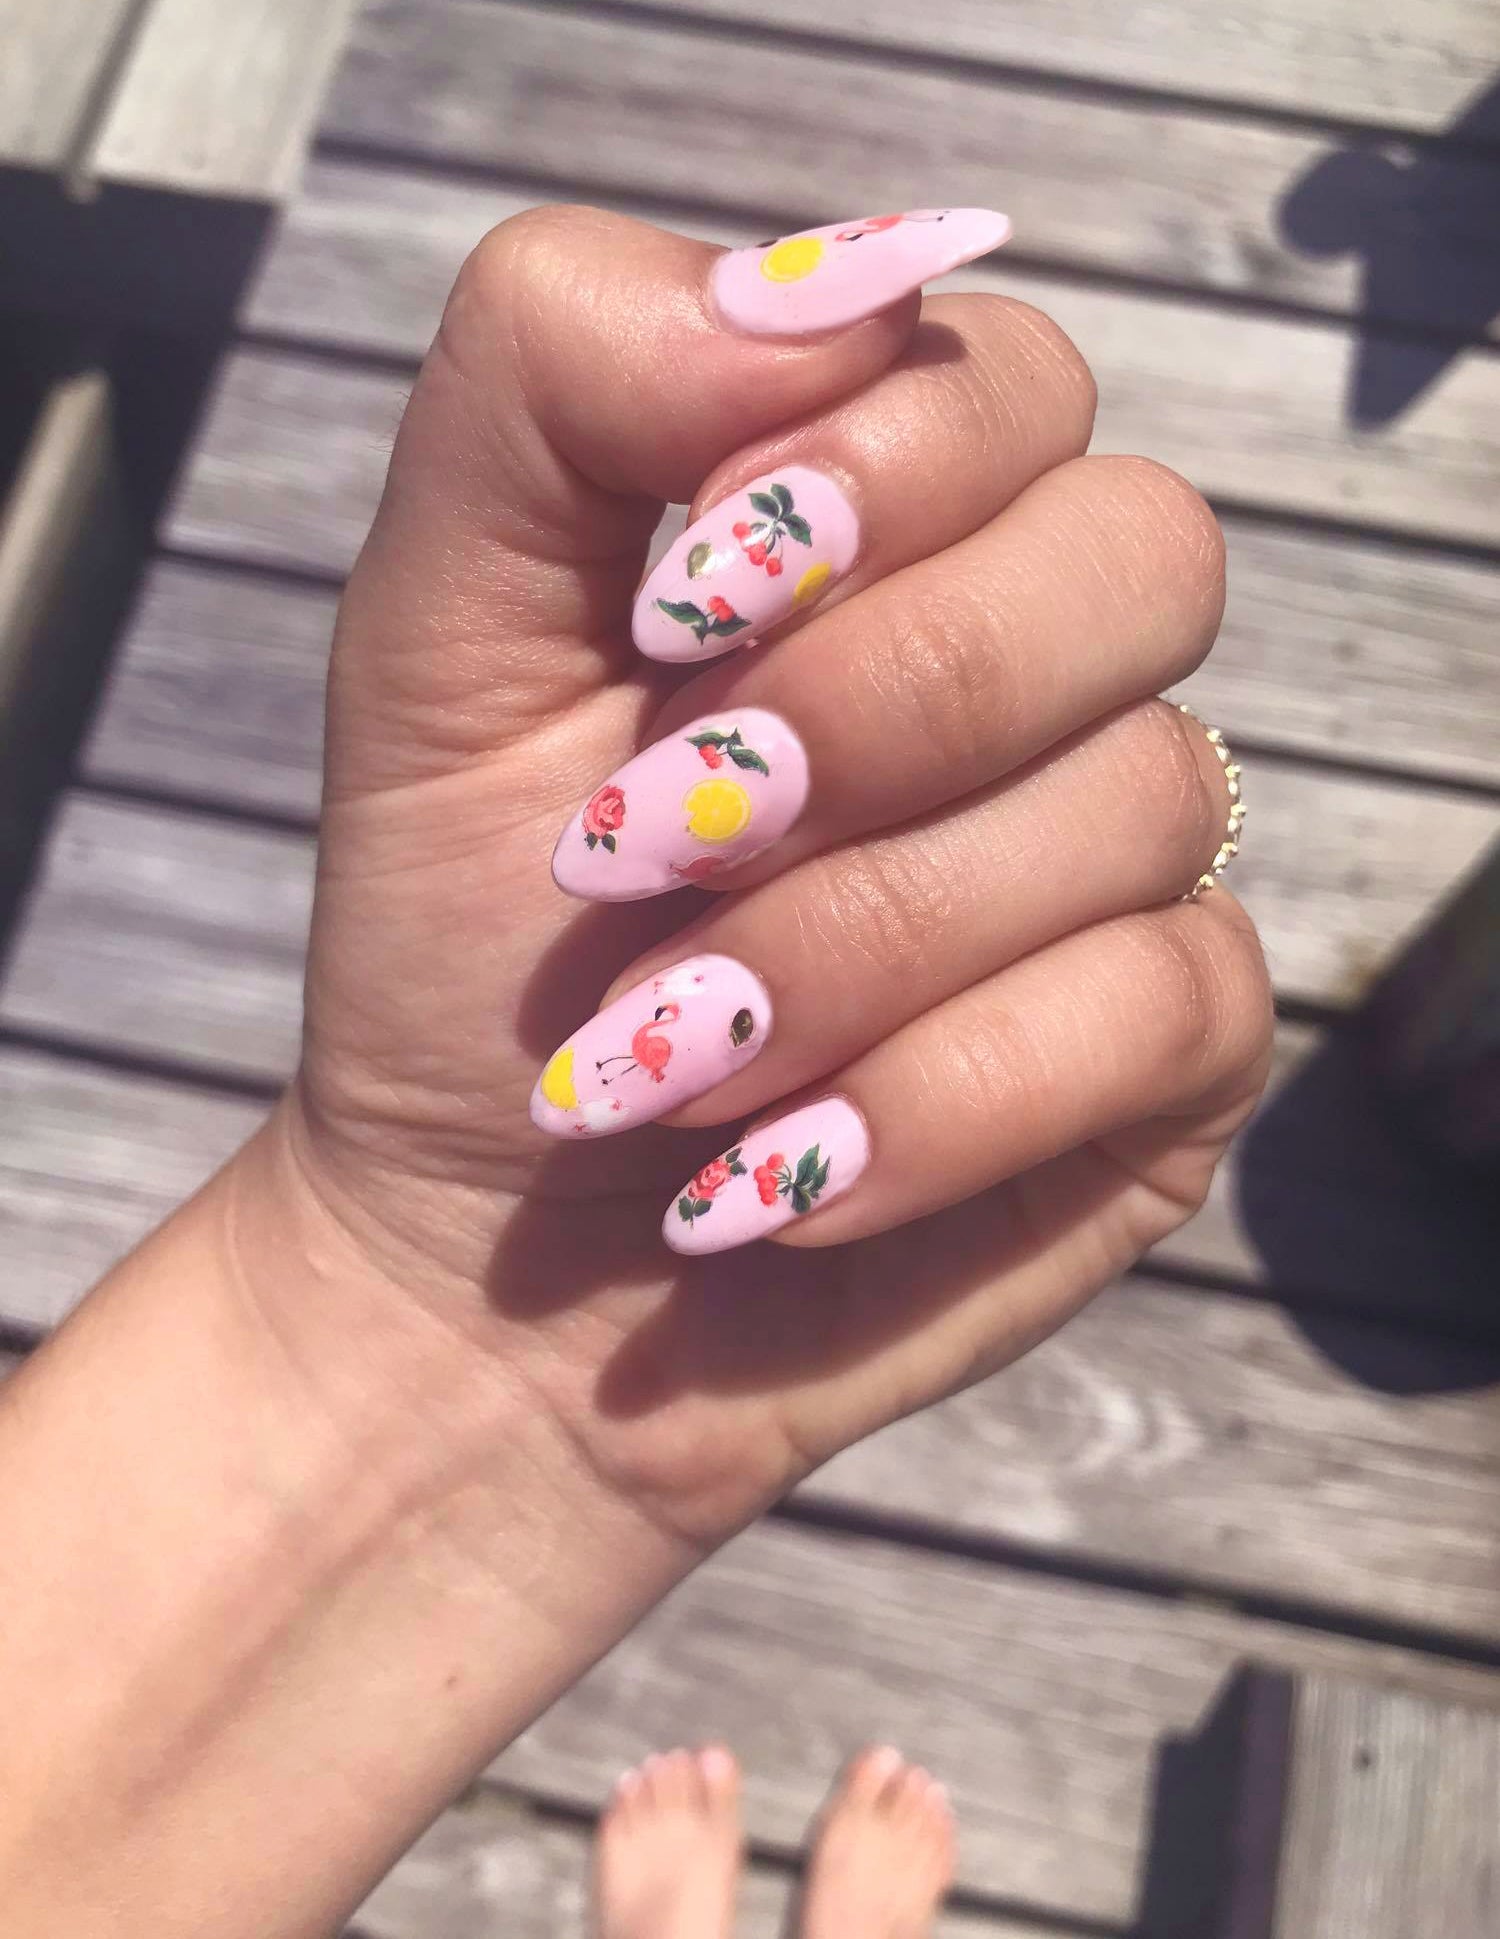 pink nail polish with flamingos, cranberries, lemons, gold accent sticker art